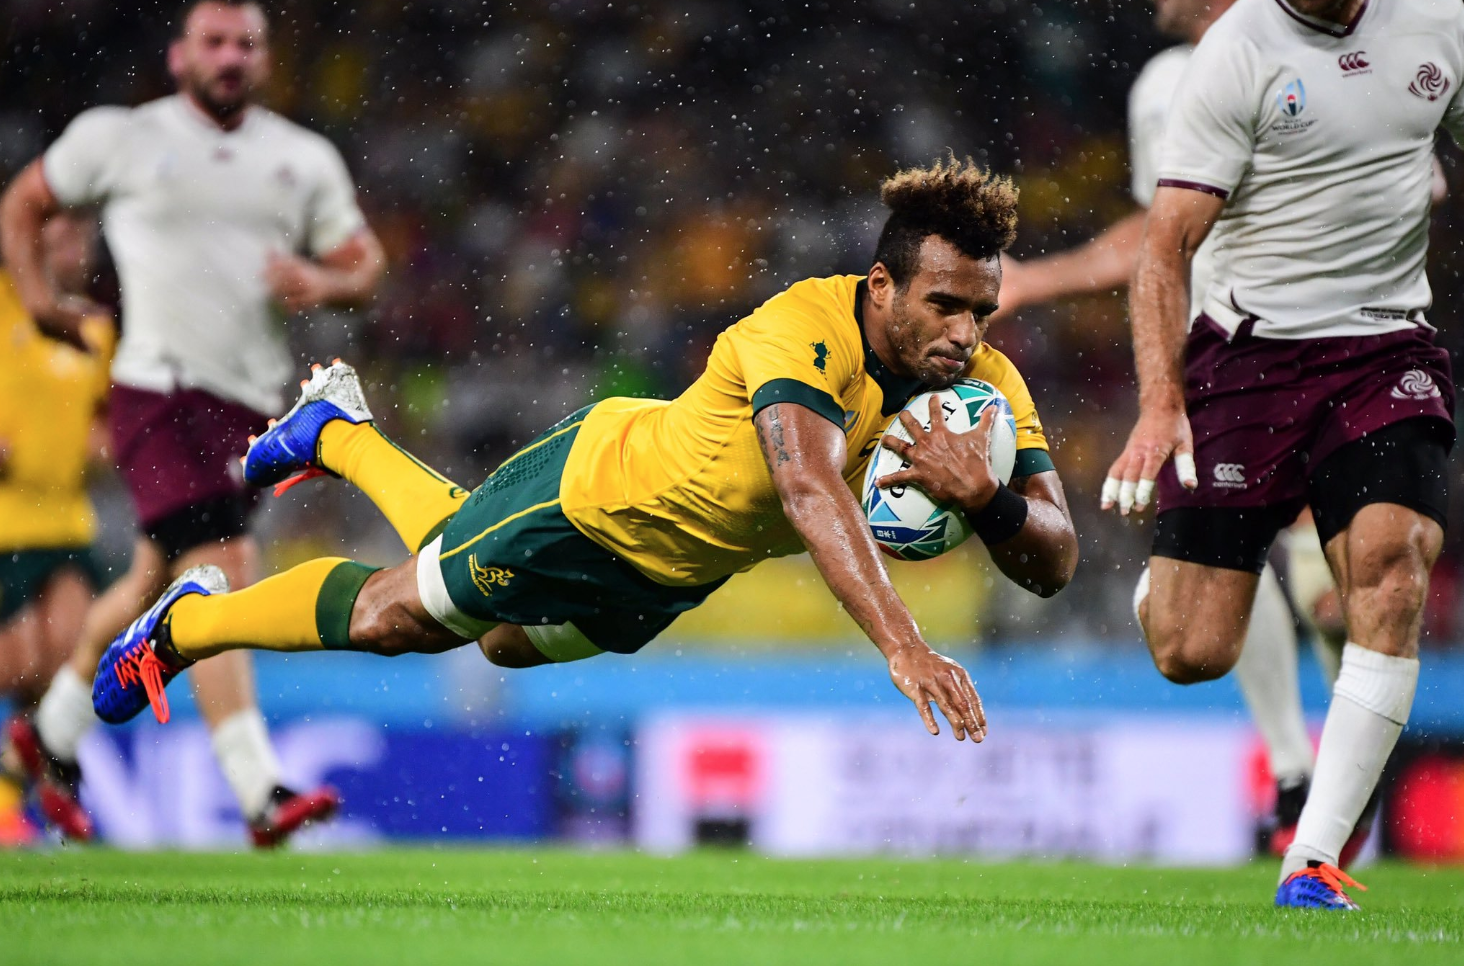 Tens Rugby World Cup broadcast brings 274,000 metro viewers on Friday night